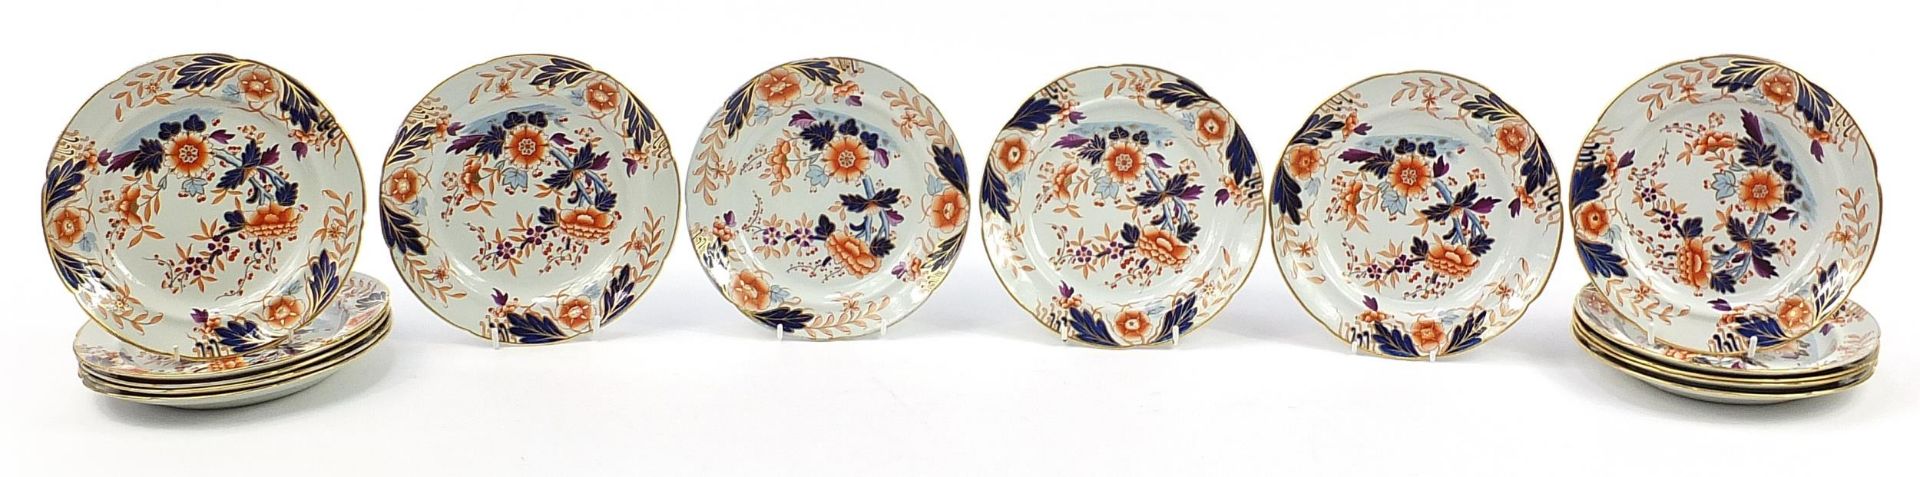 Fourteen Davenport Imari pattern stone china plates hand painted and gilded with flowers, 22cm in